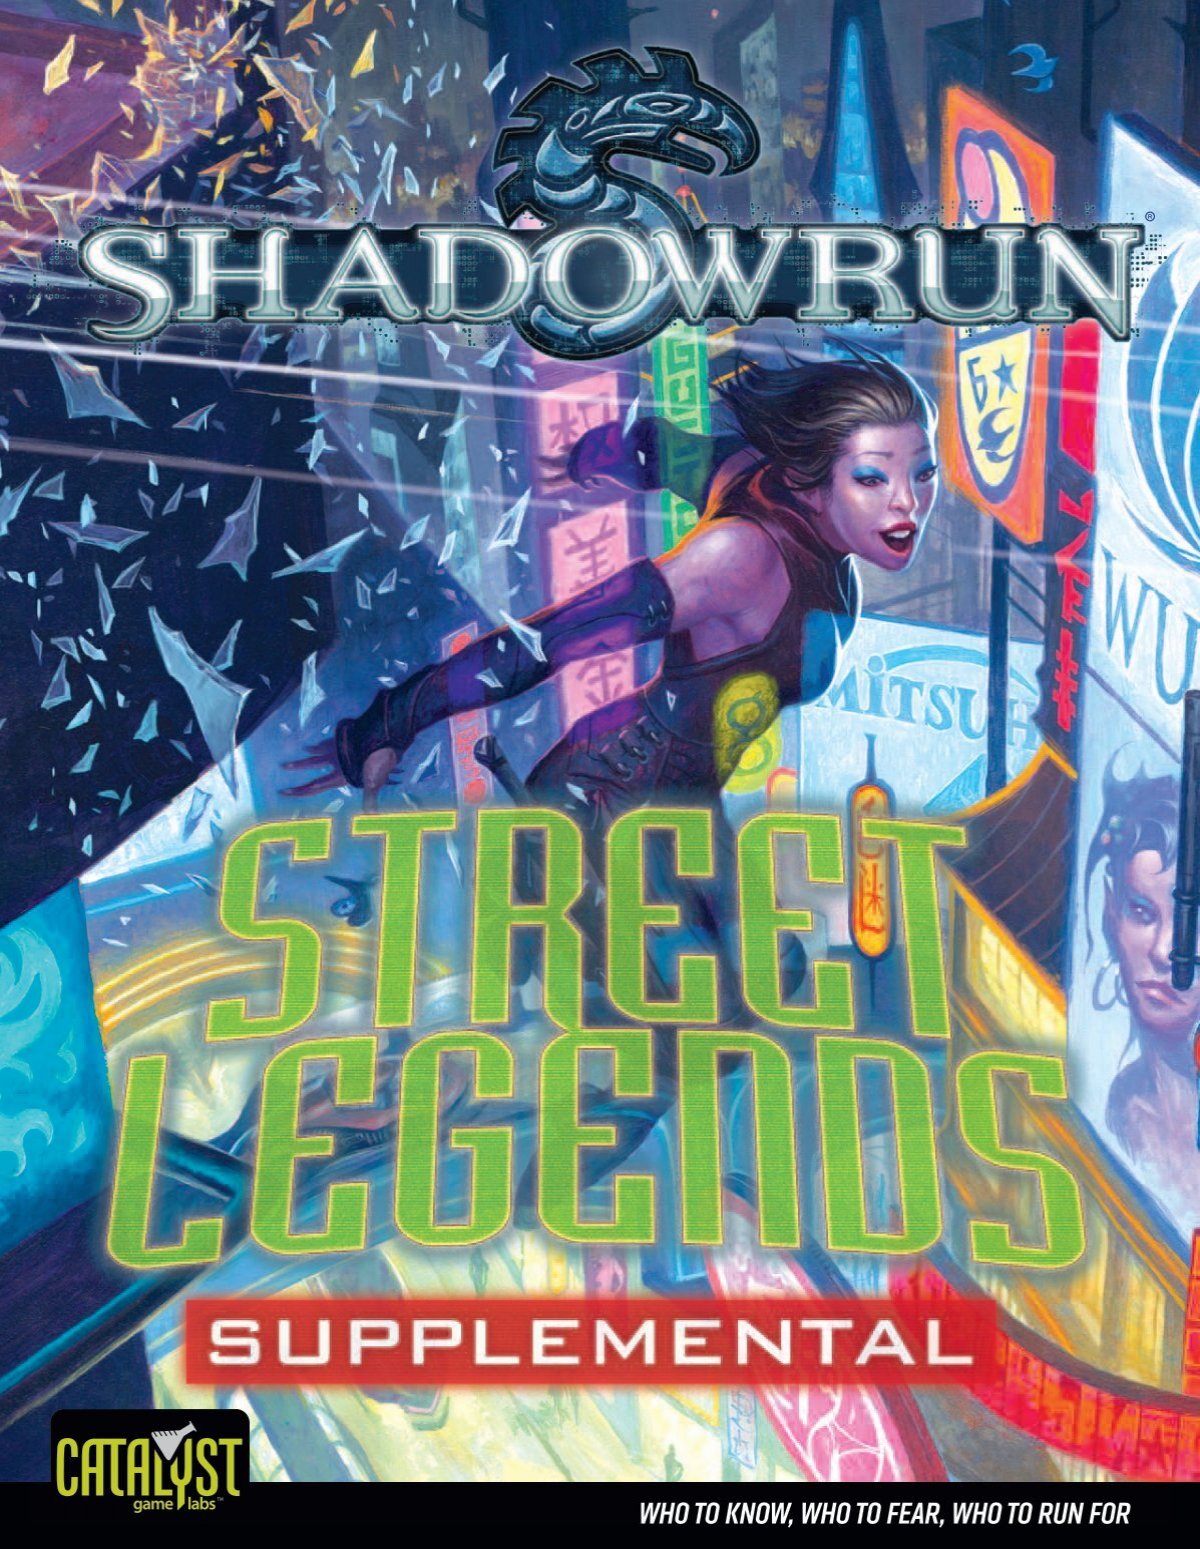 Thirteen's Fortunes — Just some Shadowrunners.